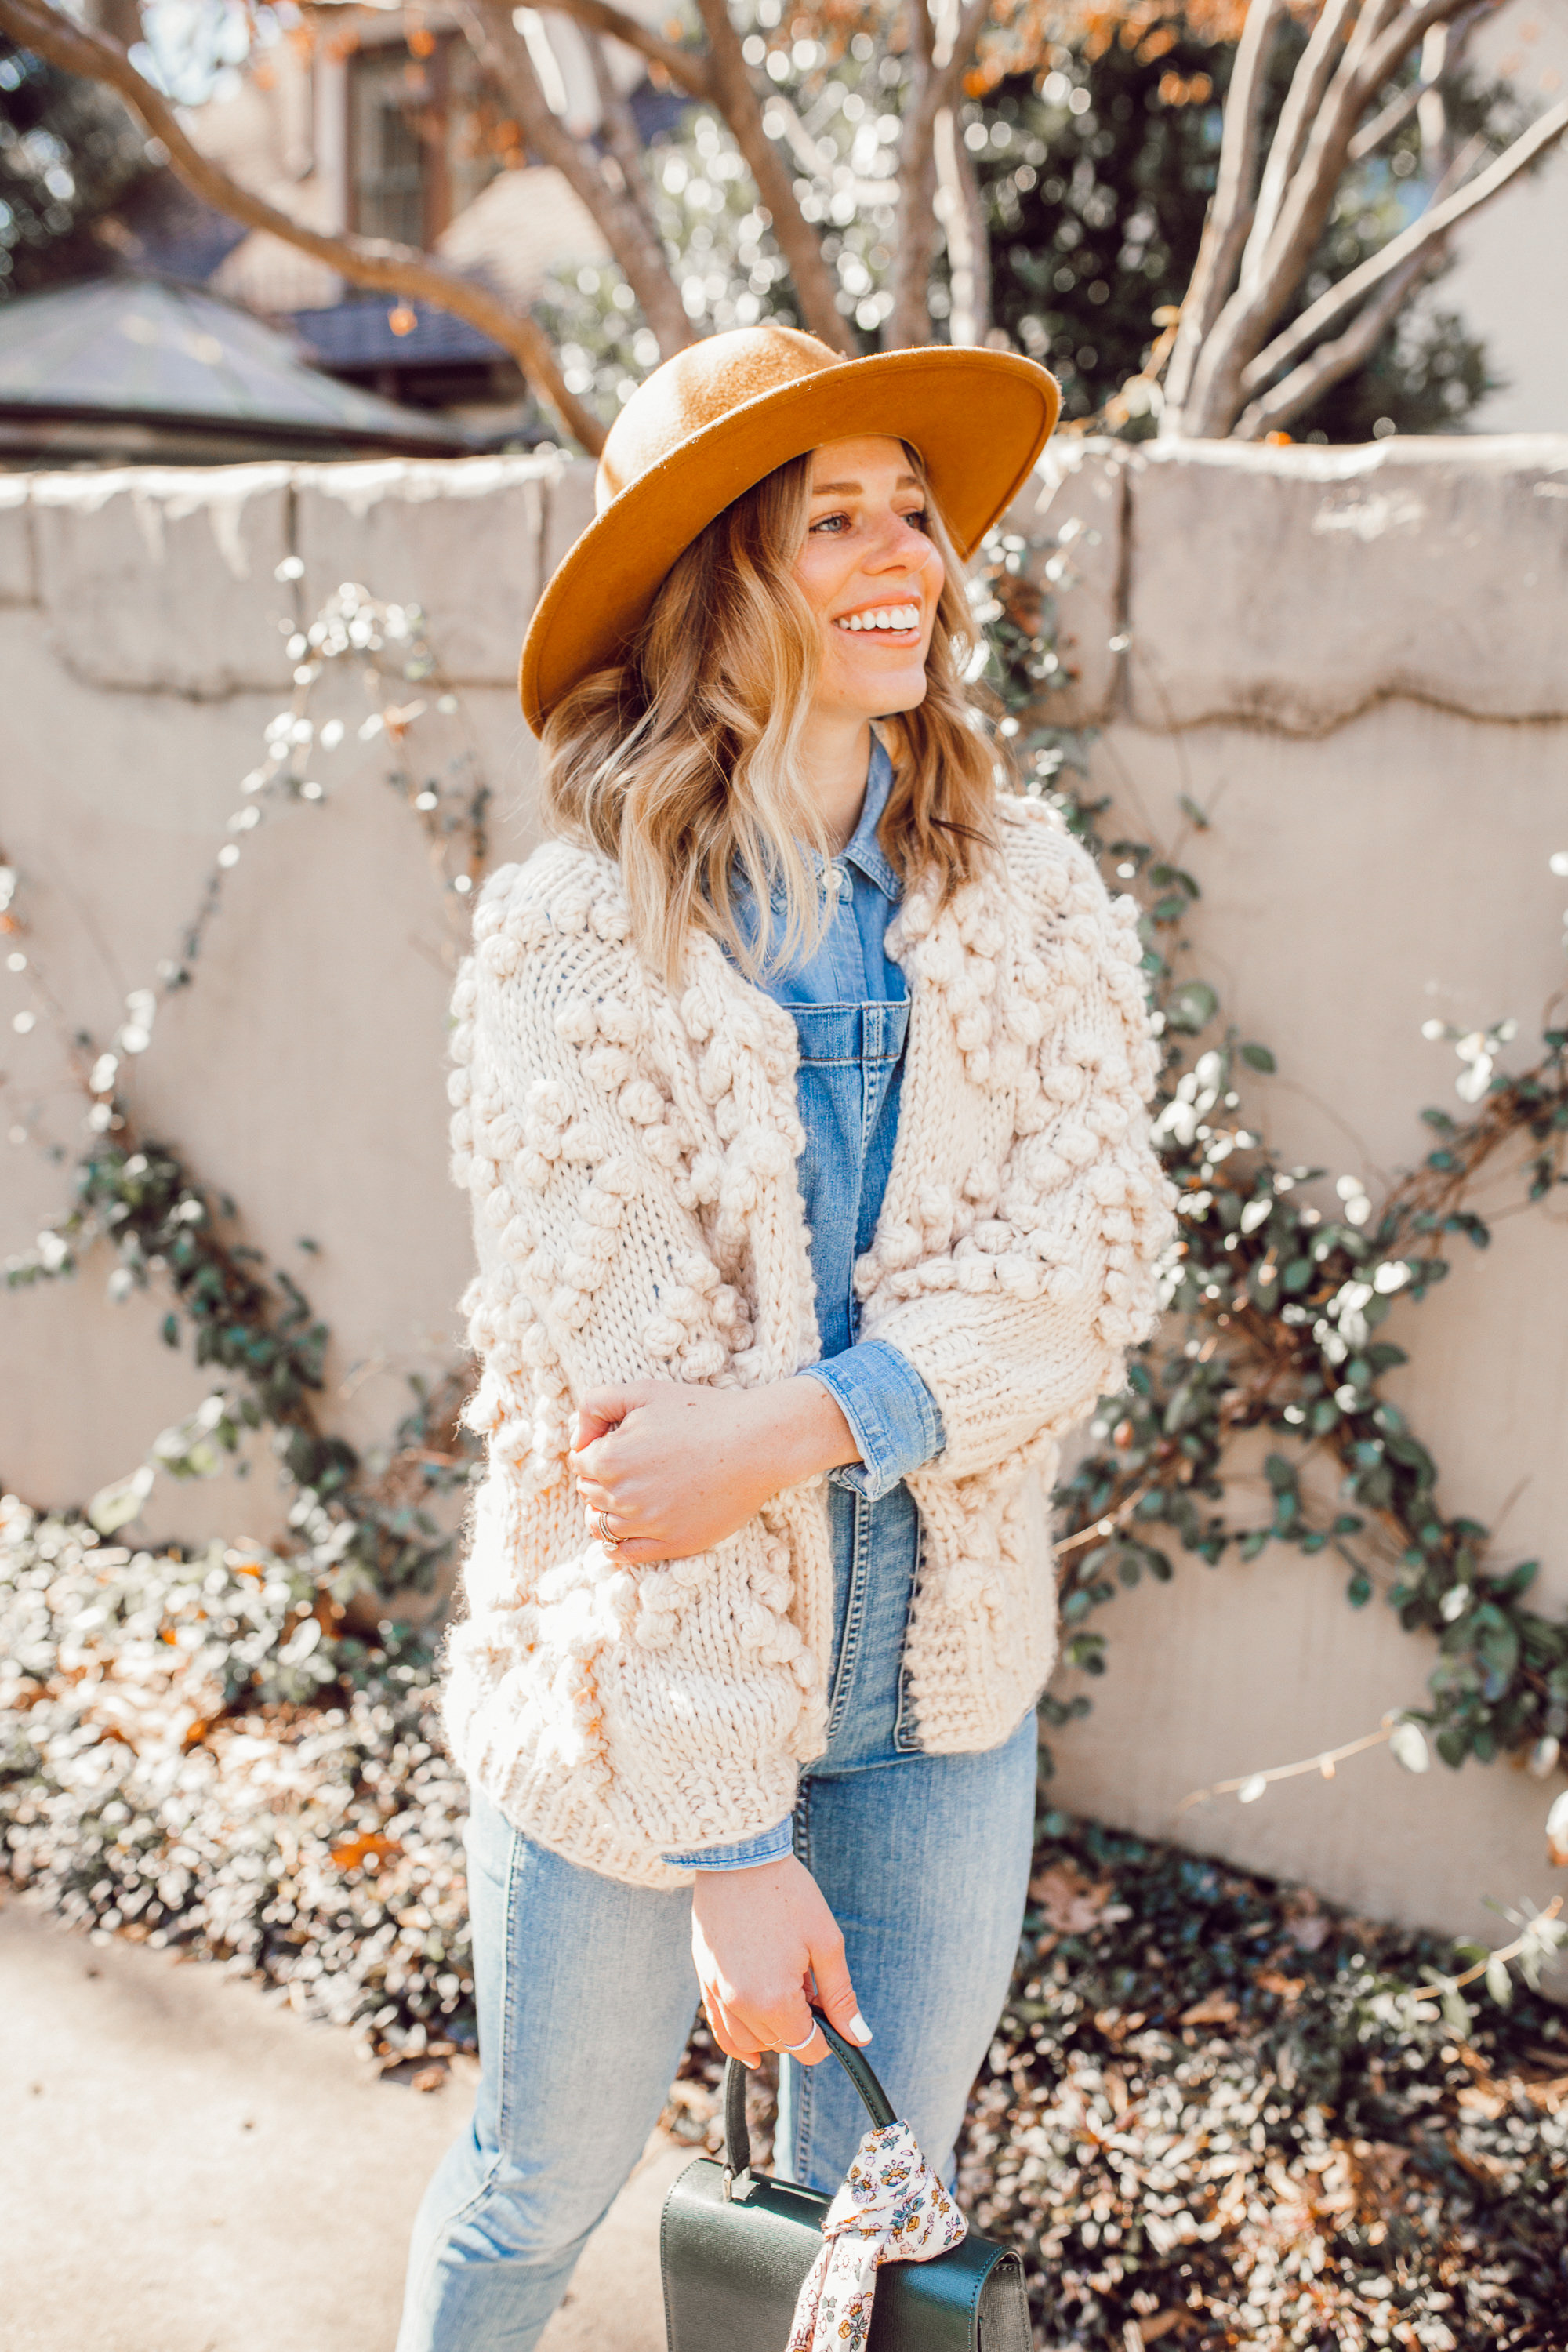 The Importance of Buying Pieces You LOVE - Even If Trendy featured on top US life and style blog Louella Reese| Image of a woman wearing Chicwish Knit Your Love Cardigan, Madewell Overalls, Yellow Wool Hat, Ariat Two24 Wilder Boots, and Neely & Chloe Ladylike Handbag.